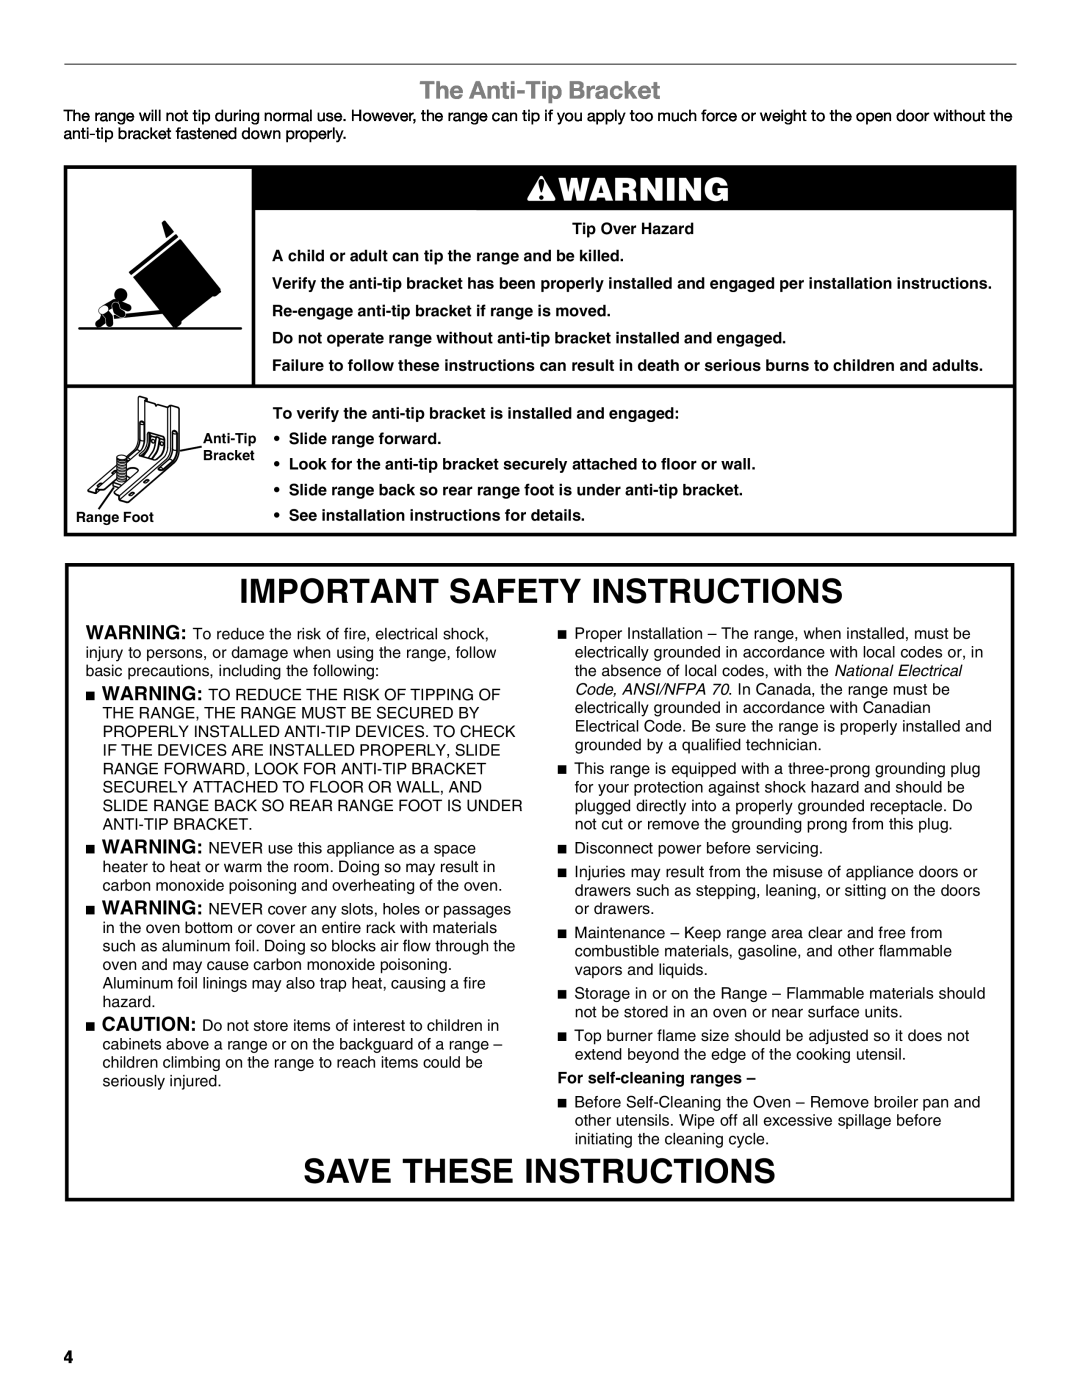 Whirlpool WFG231LVS manual The Anti-Tip Bracket, Important Safety Instructions, Save These Instructions 